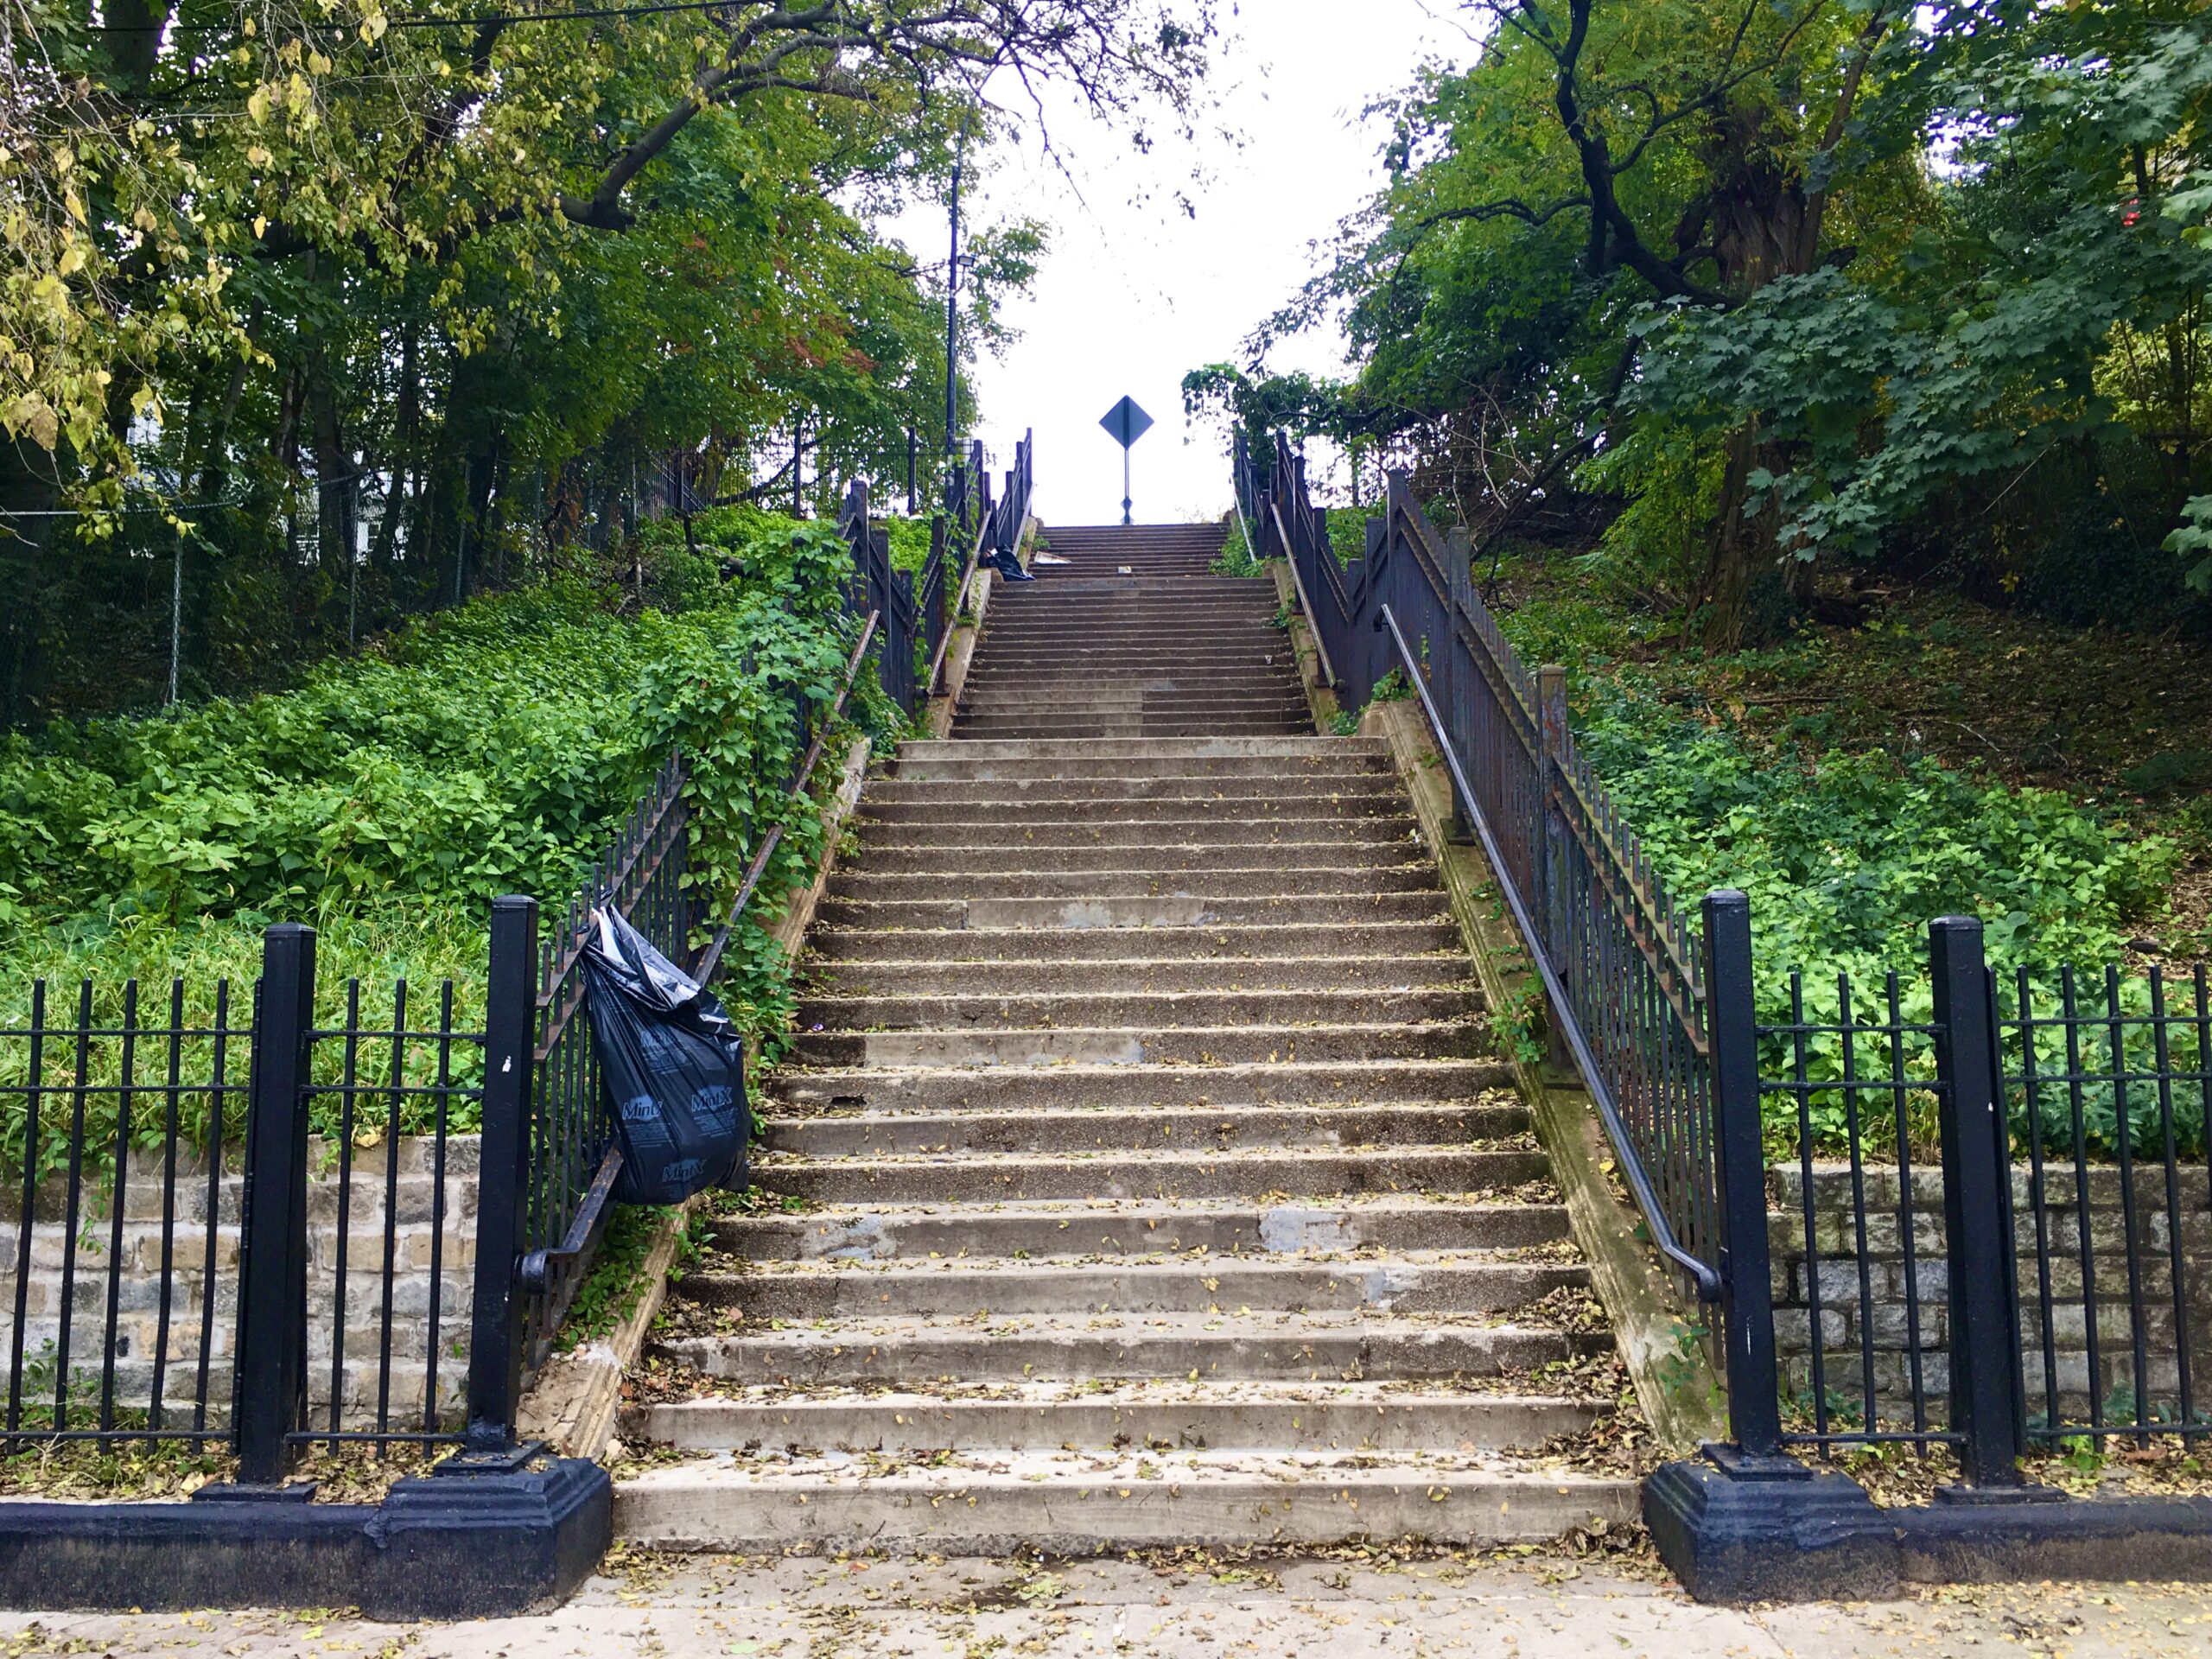  Here’s one of Bay Ridge’s step streets, where you can dance like the Joker without sharing the stairs with a crowd. Eagle photo by Lore Croghan